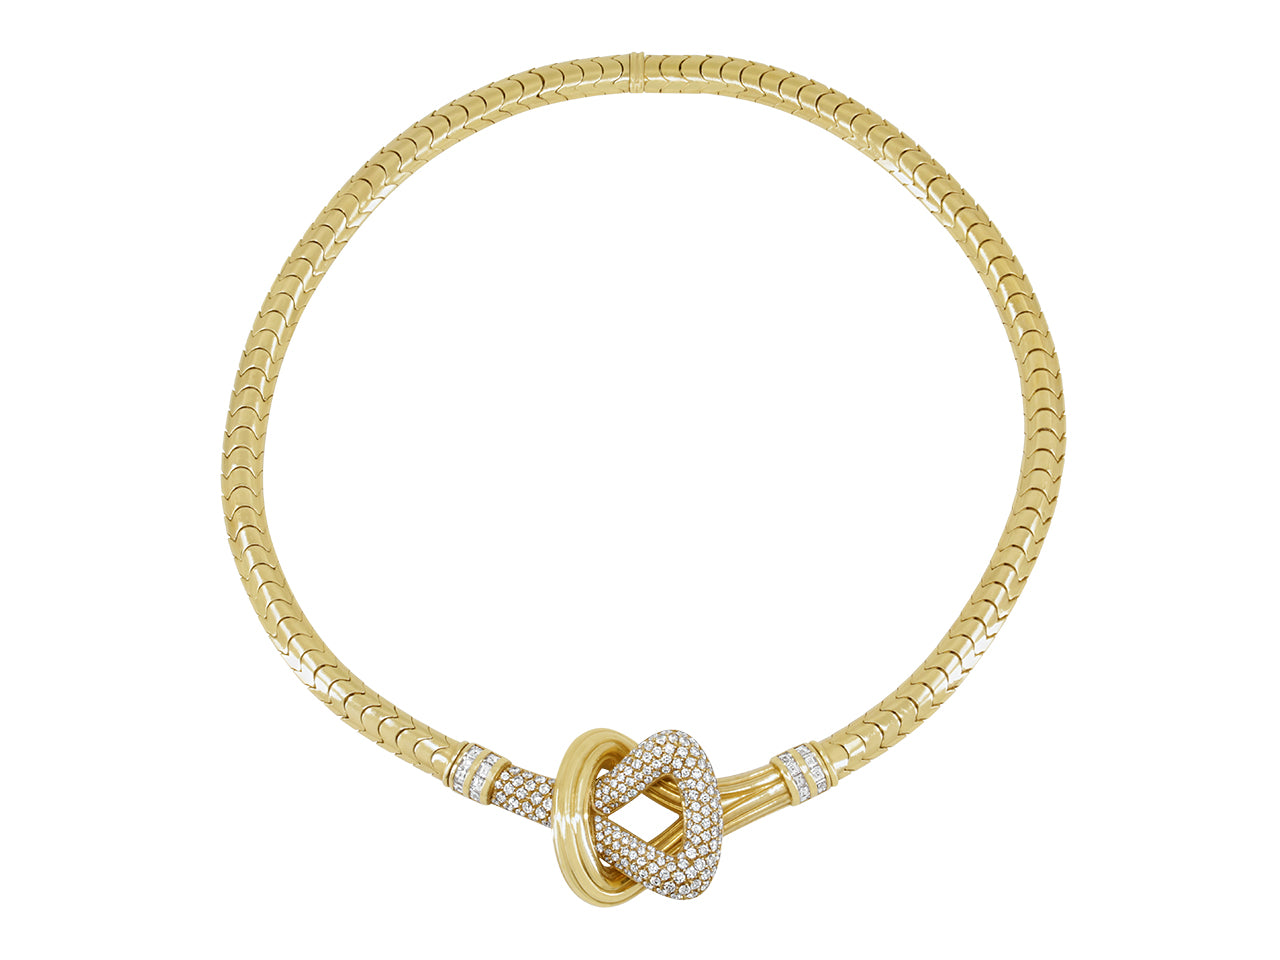 Cartier Diamond Knot Necklace in 18K Gold